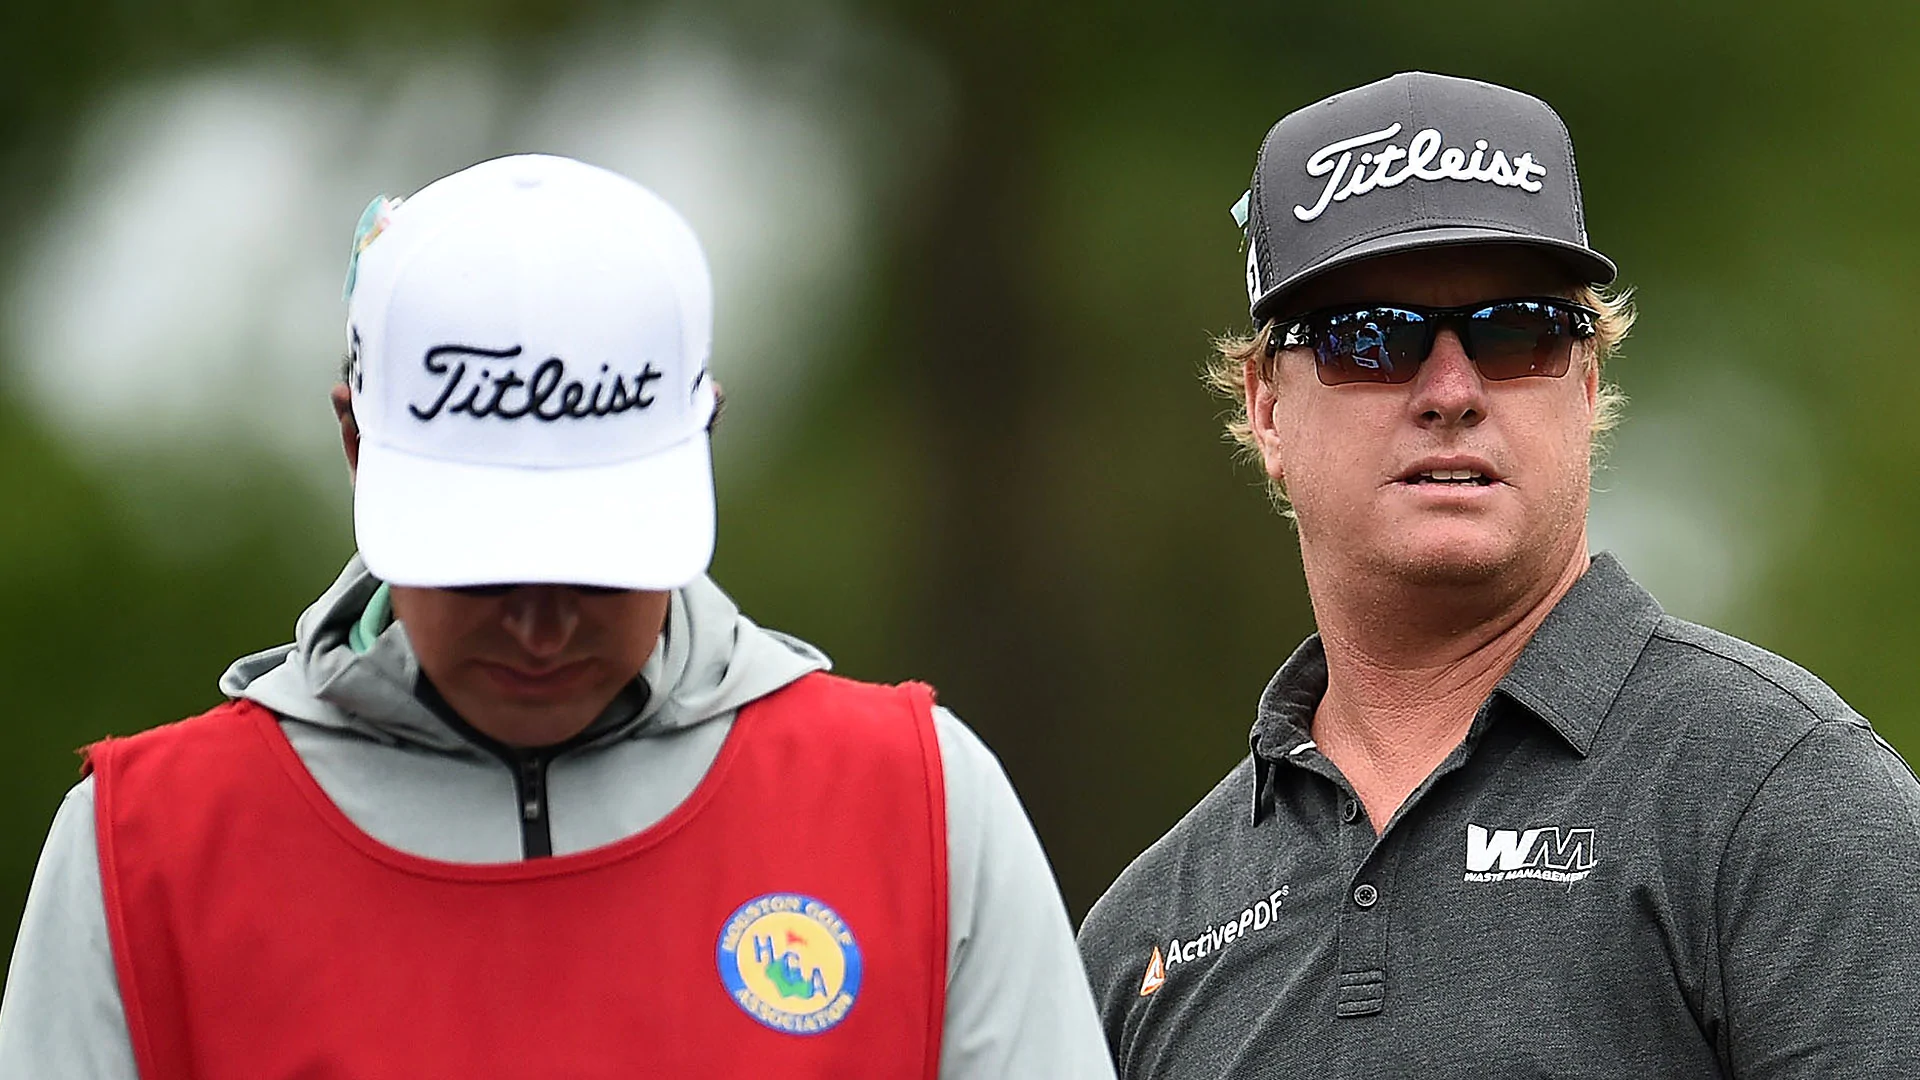 Hoffman talks caddie into shot: 'Tired of finishing 2nd'